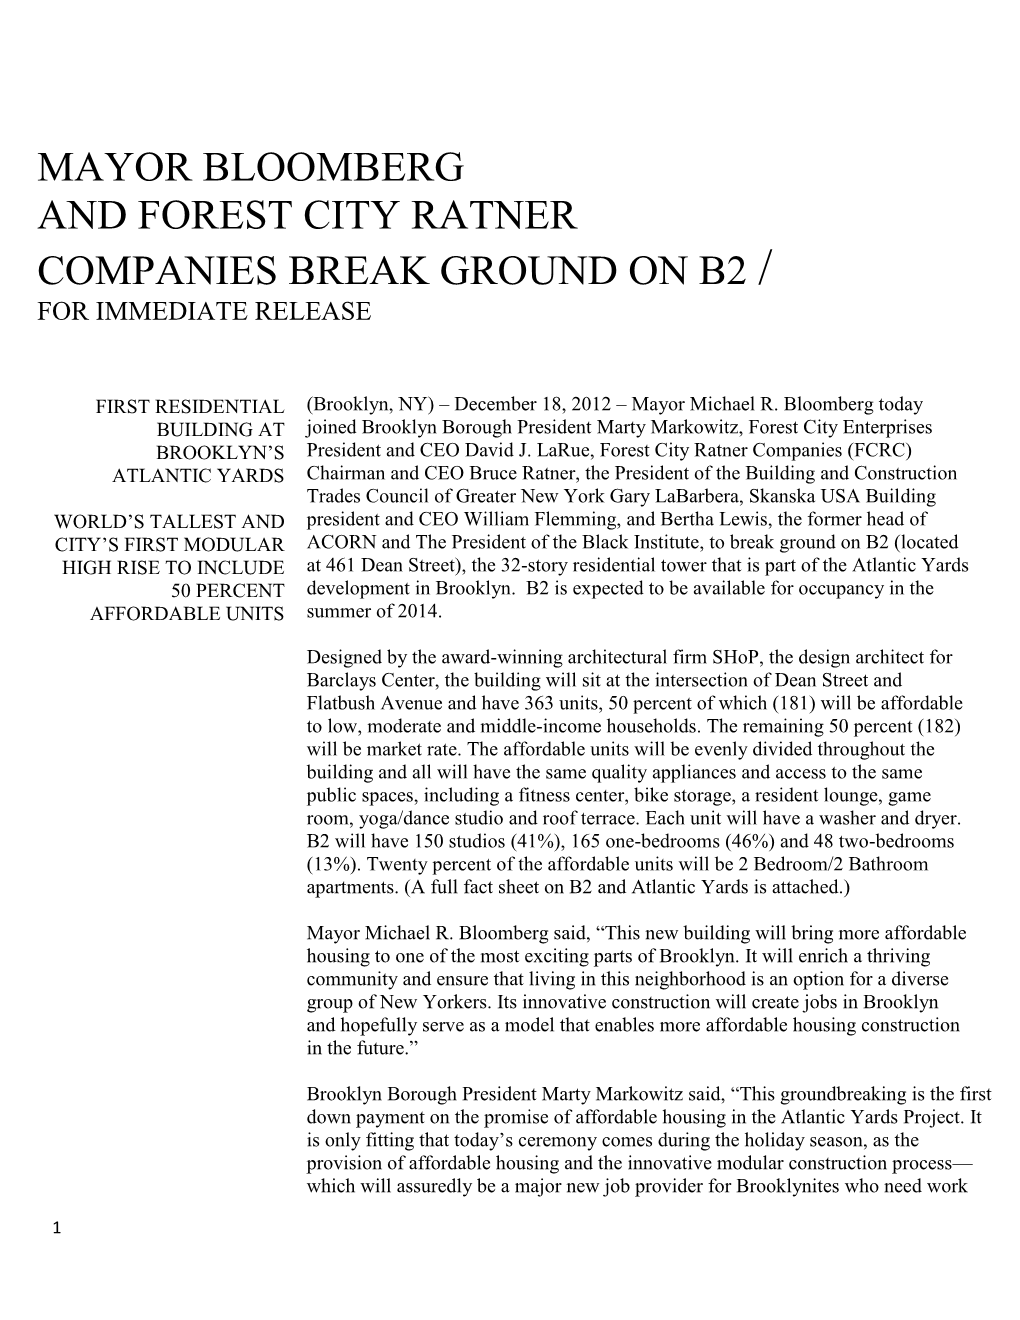 Mayor Bloomberg and Forest City Ratner